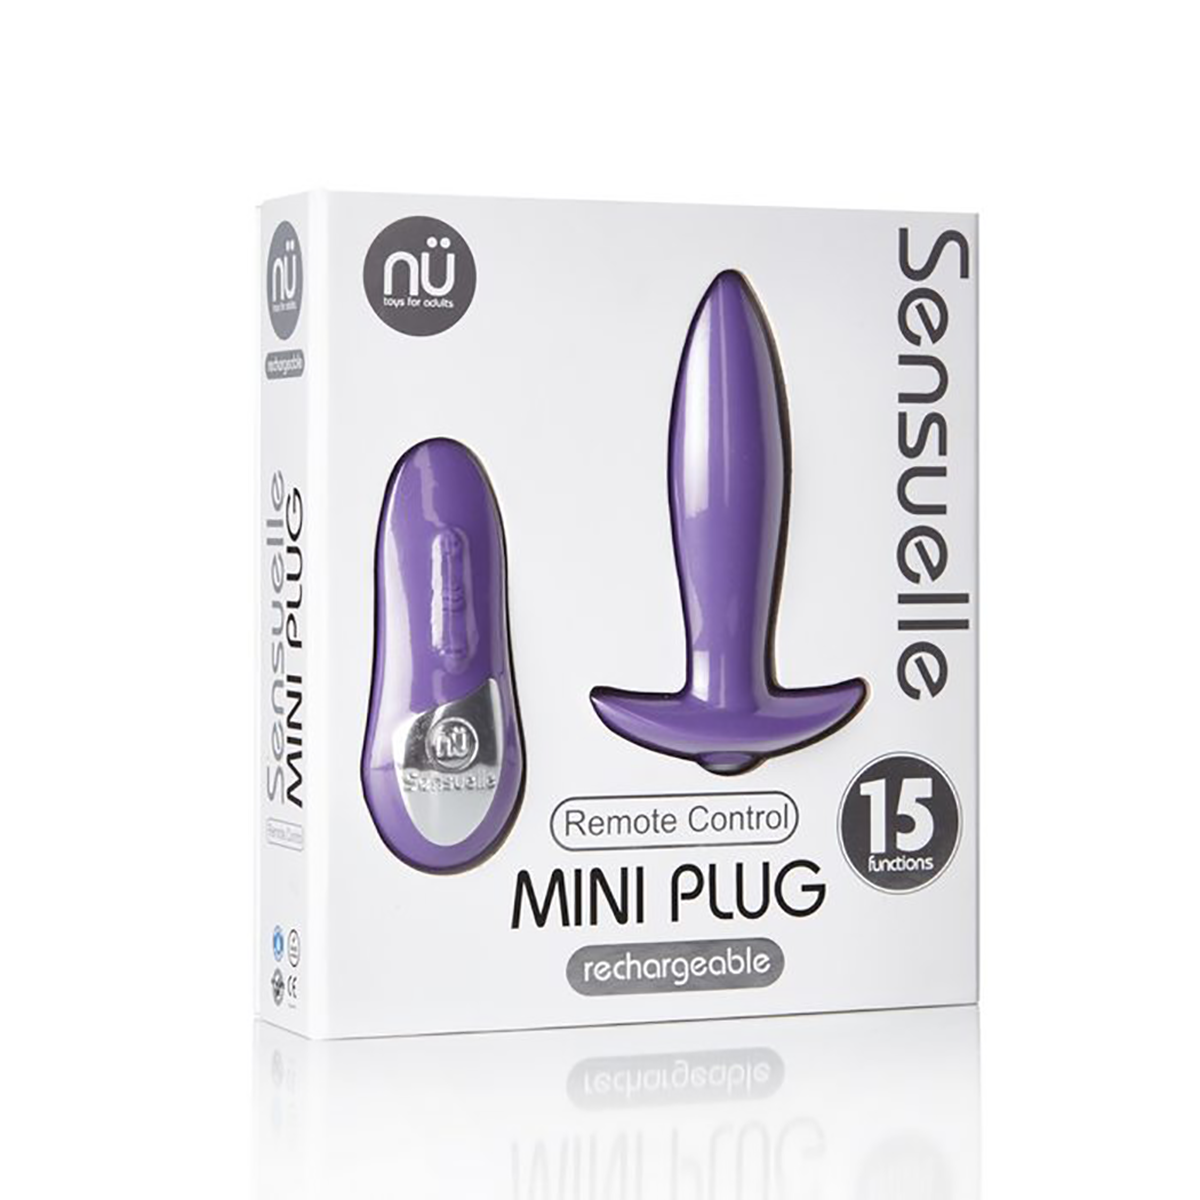 This user-friendly, petite, and feature-packed plug delivers mind blowing power inside and out. Use it to tease while rimming or to please while fully inserted. With or without the remote; the power is yours!